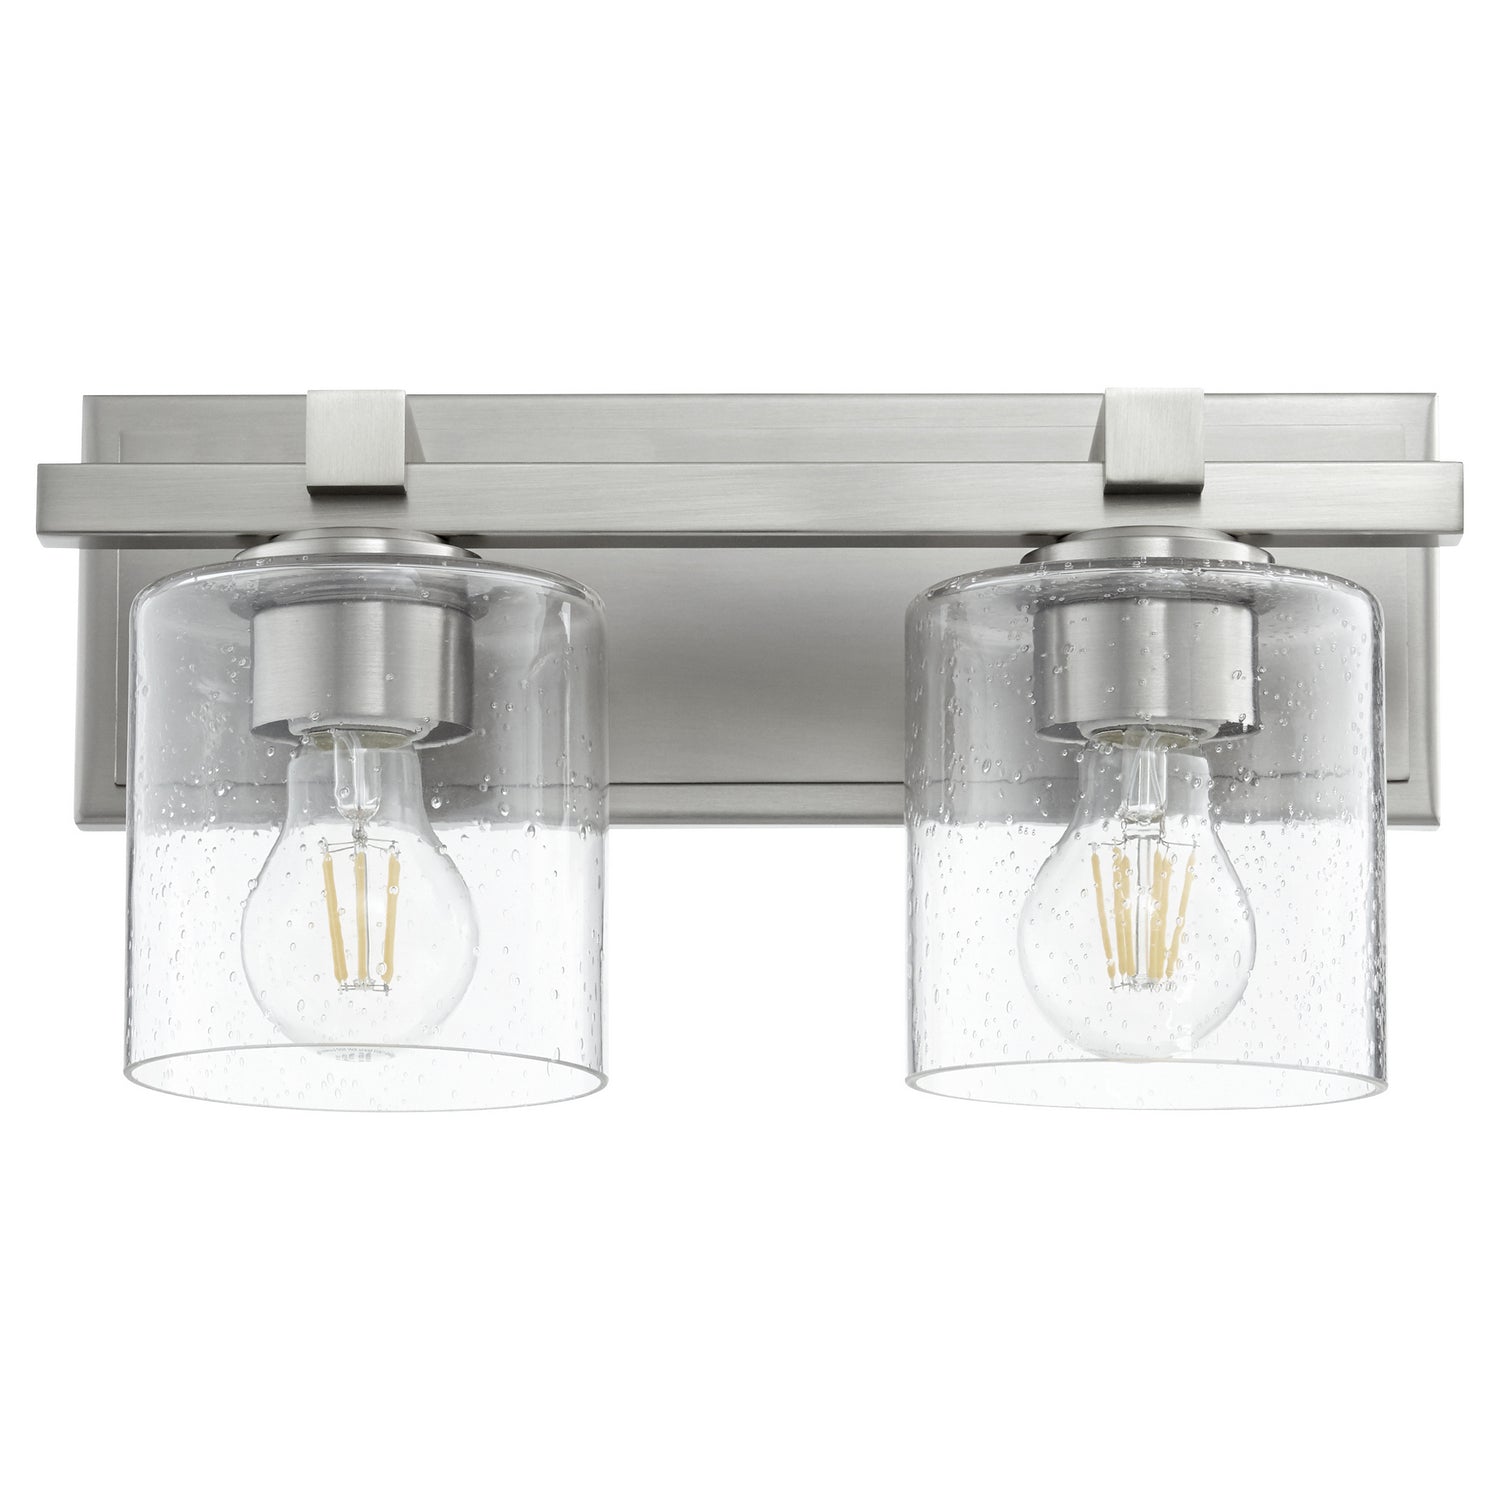 Quorum - 5669-2-265 - Two Light Wall Mount - 5669 Cylinder Lighting Series - Satin Nickel w/ Clear/Seeded